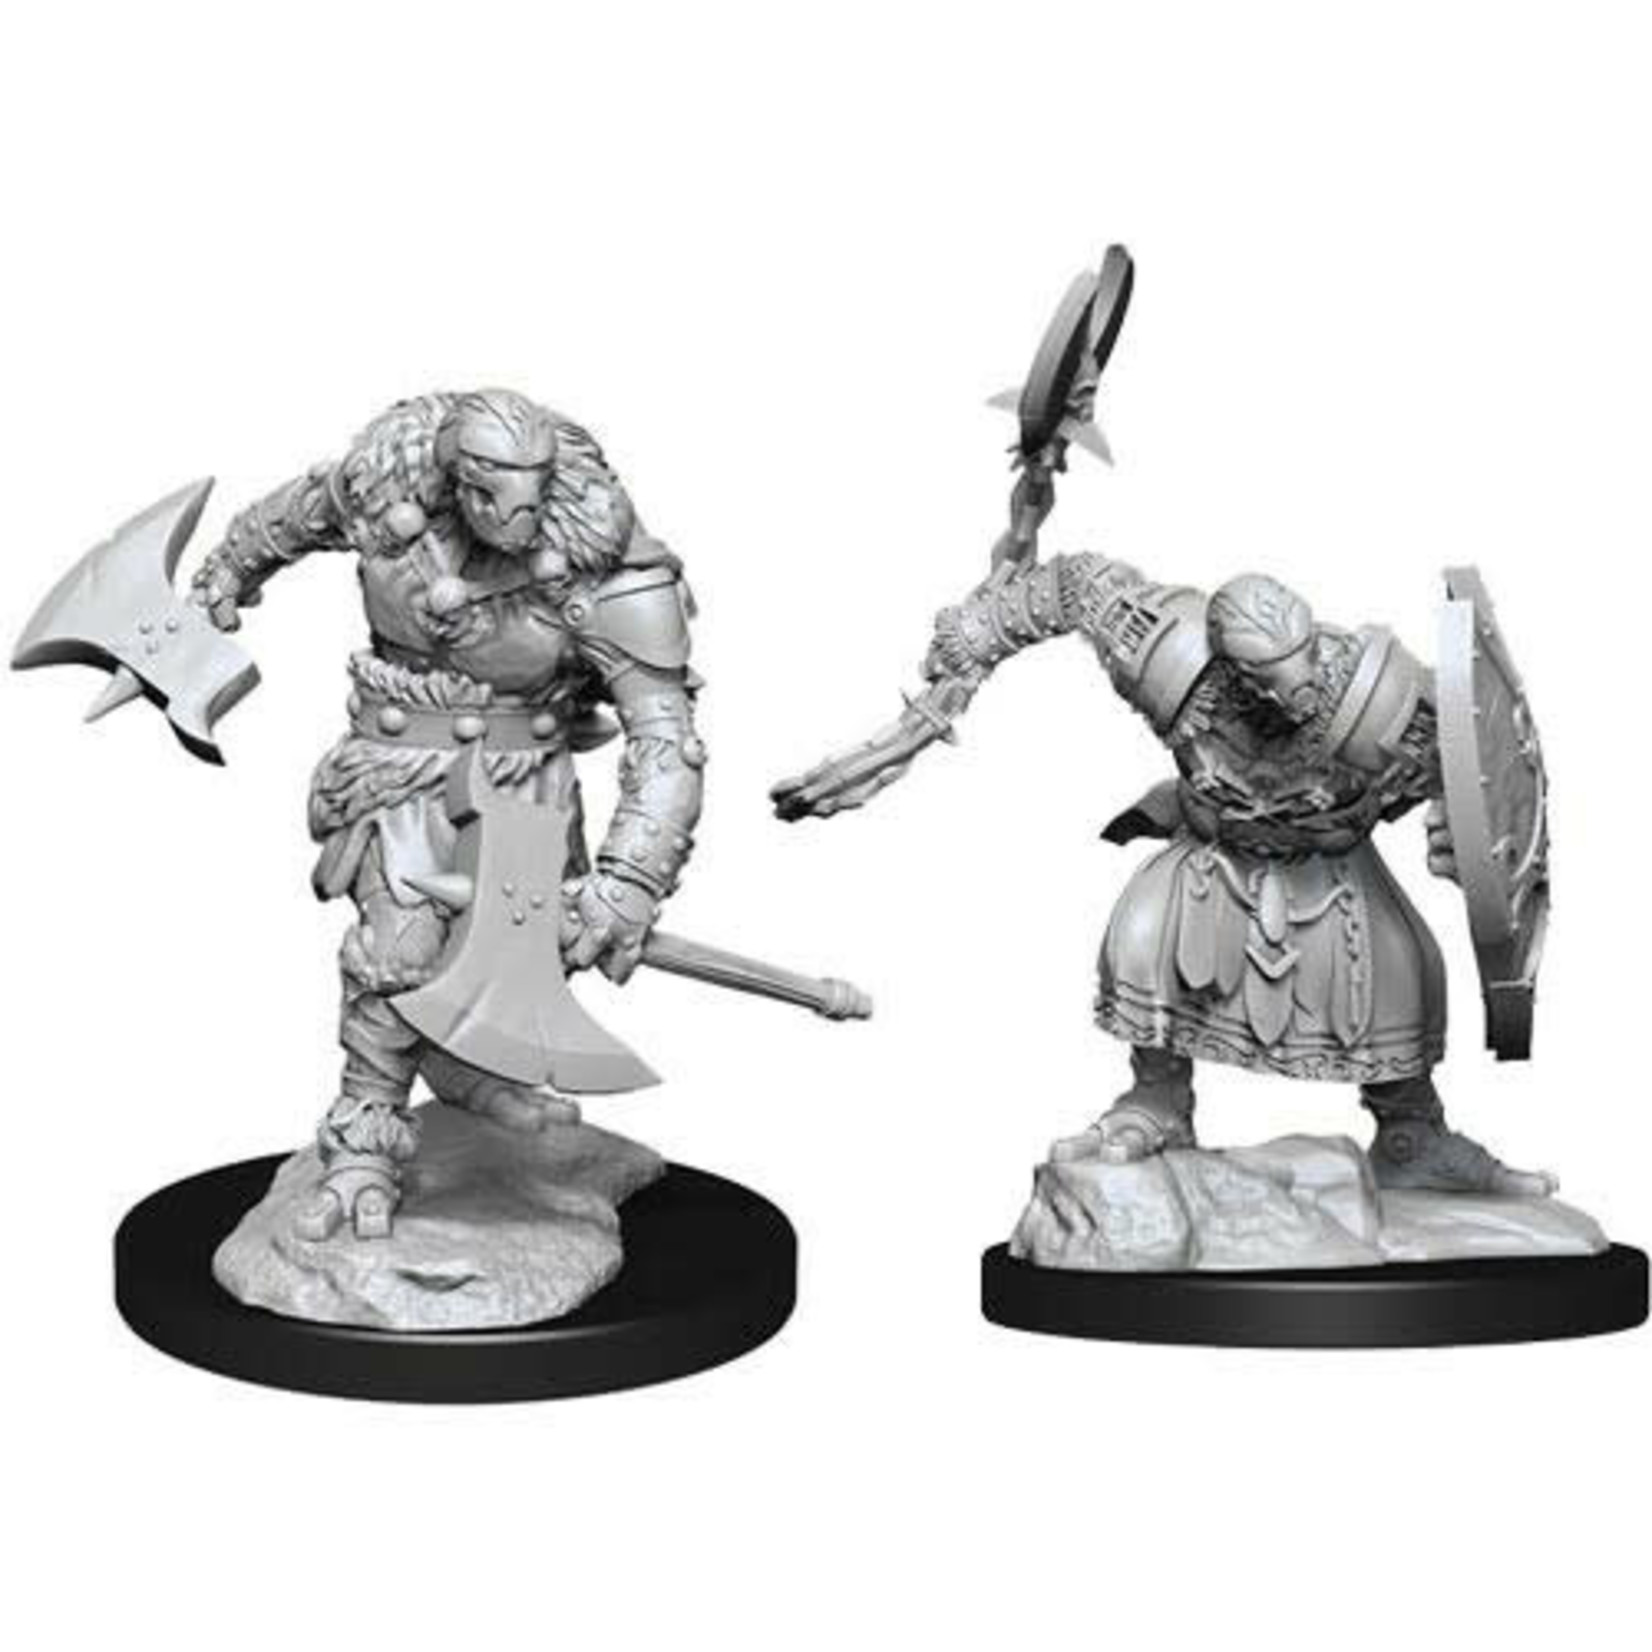 WizKids Dungeons and Dragons Nolzur's Marvelous Minis Warforged Barbarian